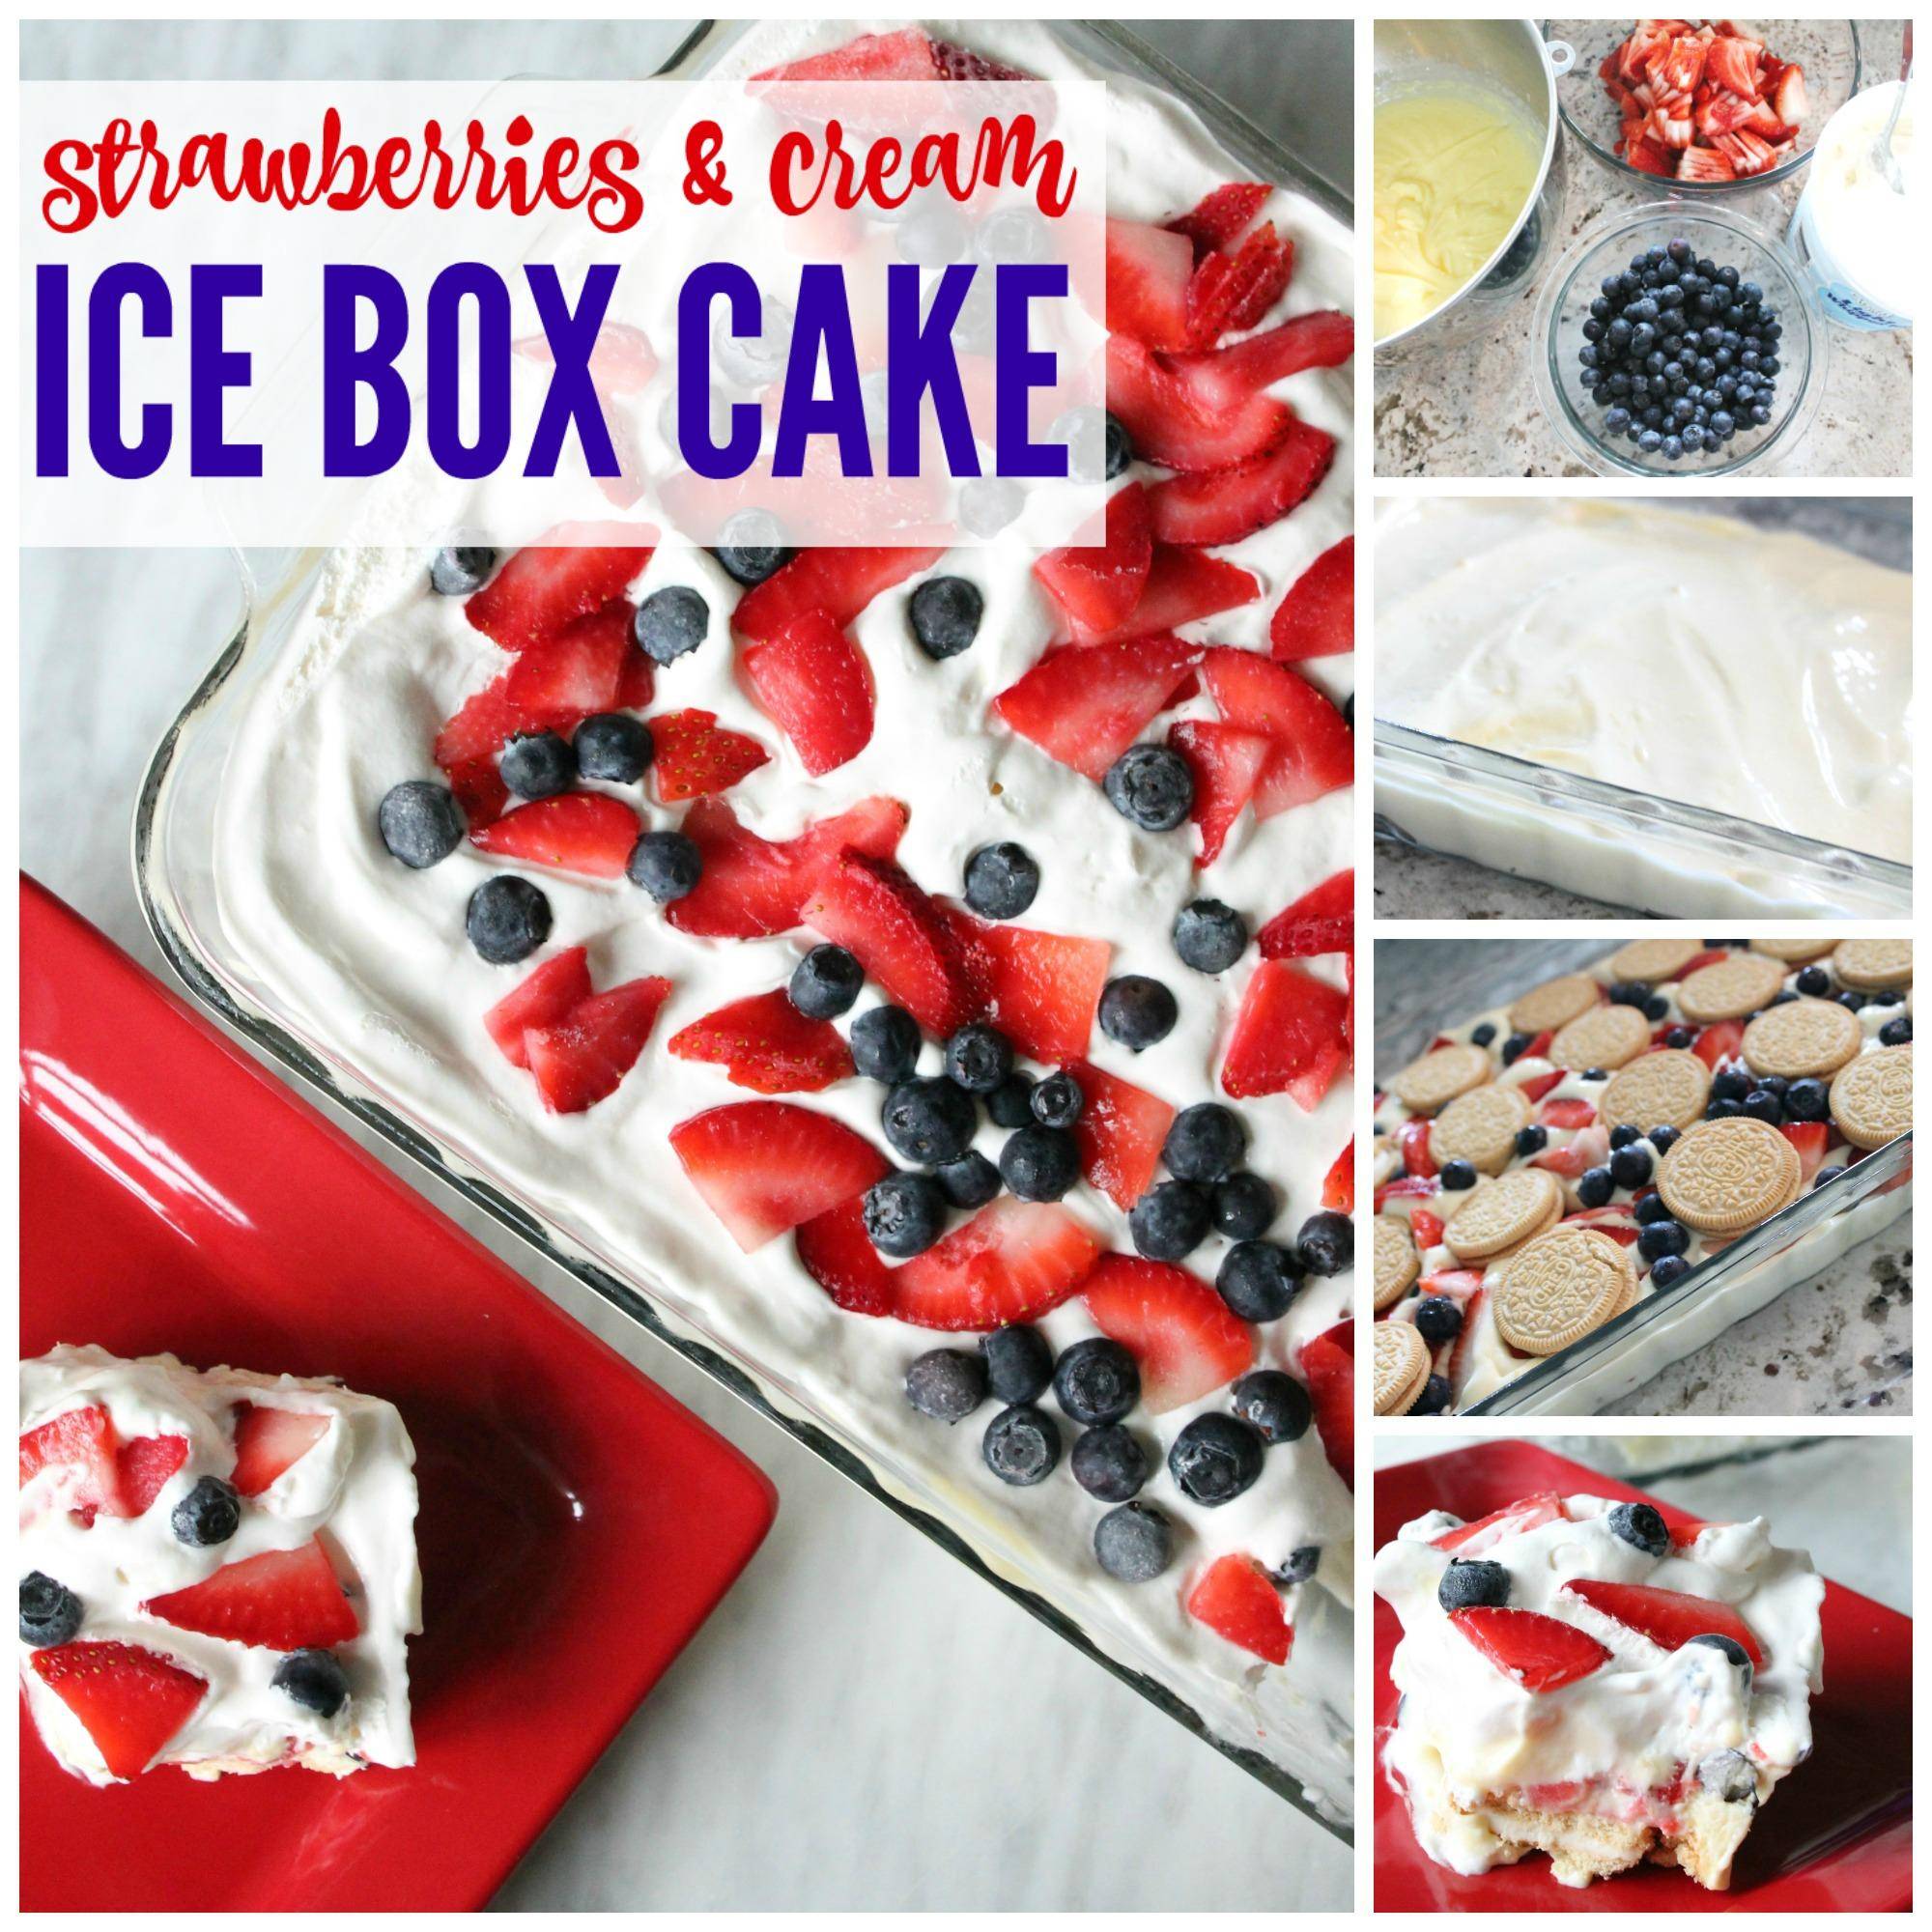 Strawberries & Cream Ice Box Cake for 4th of July